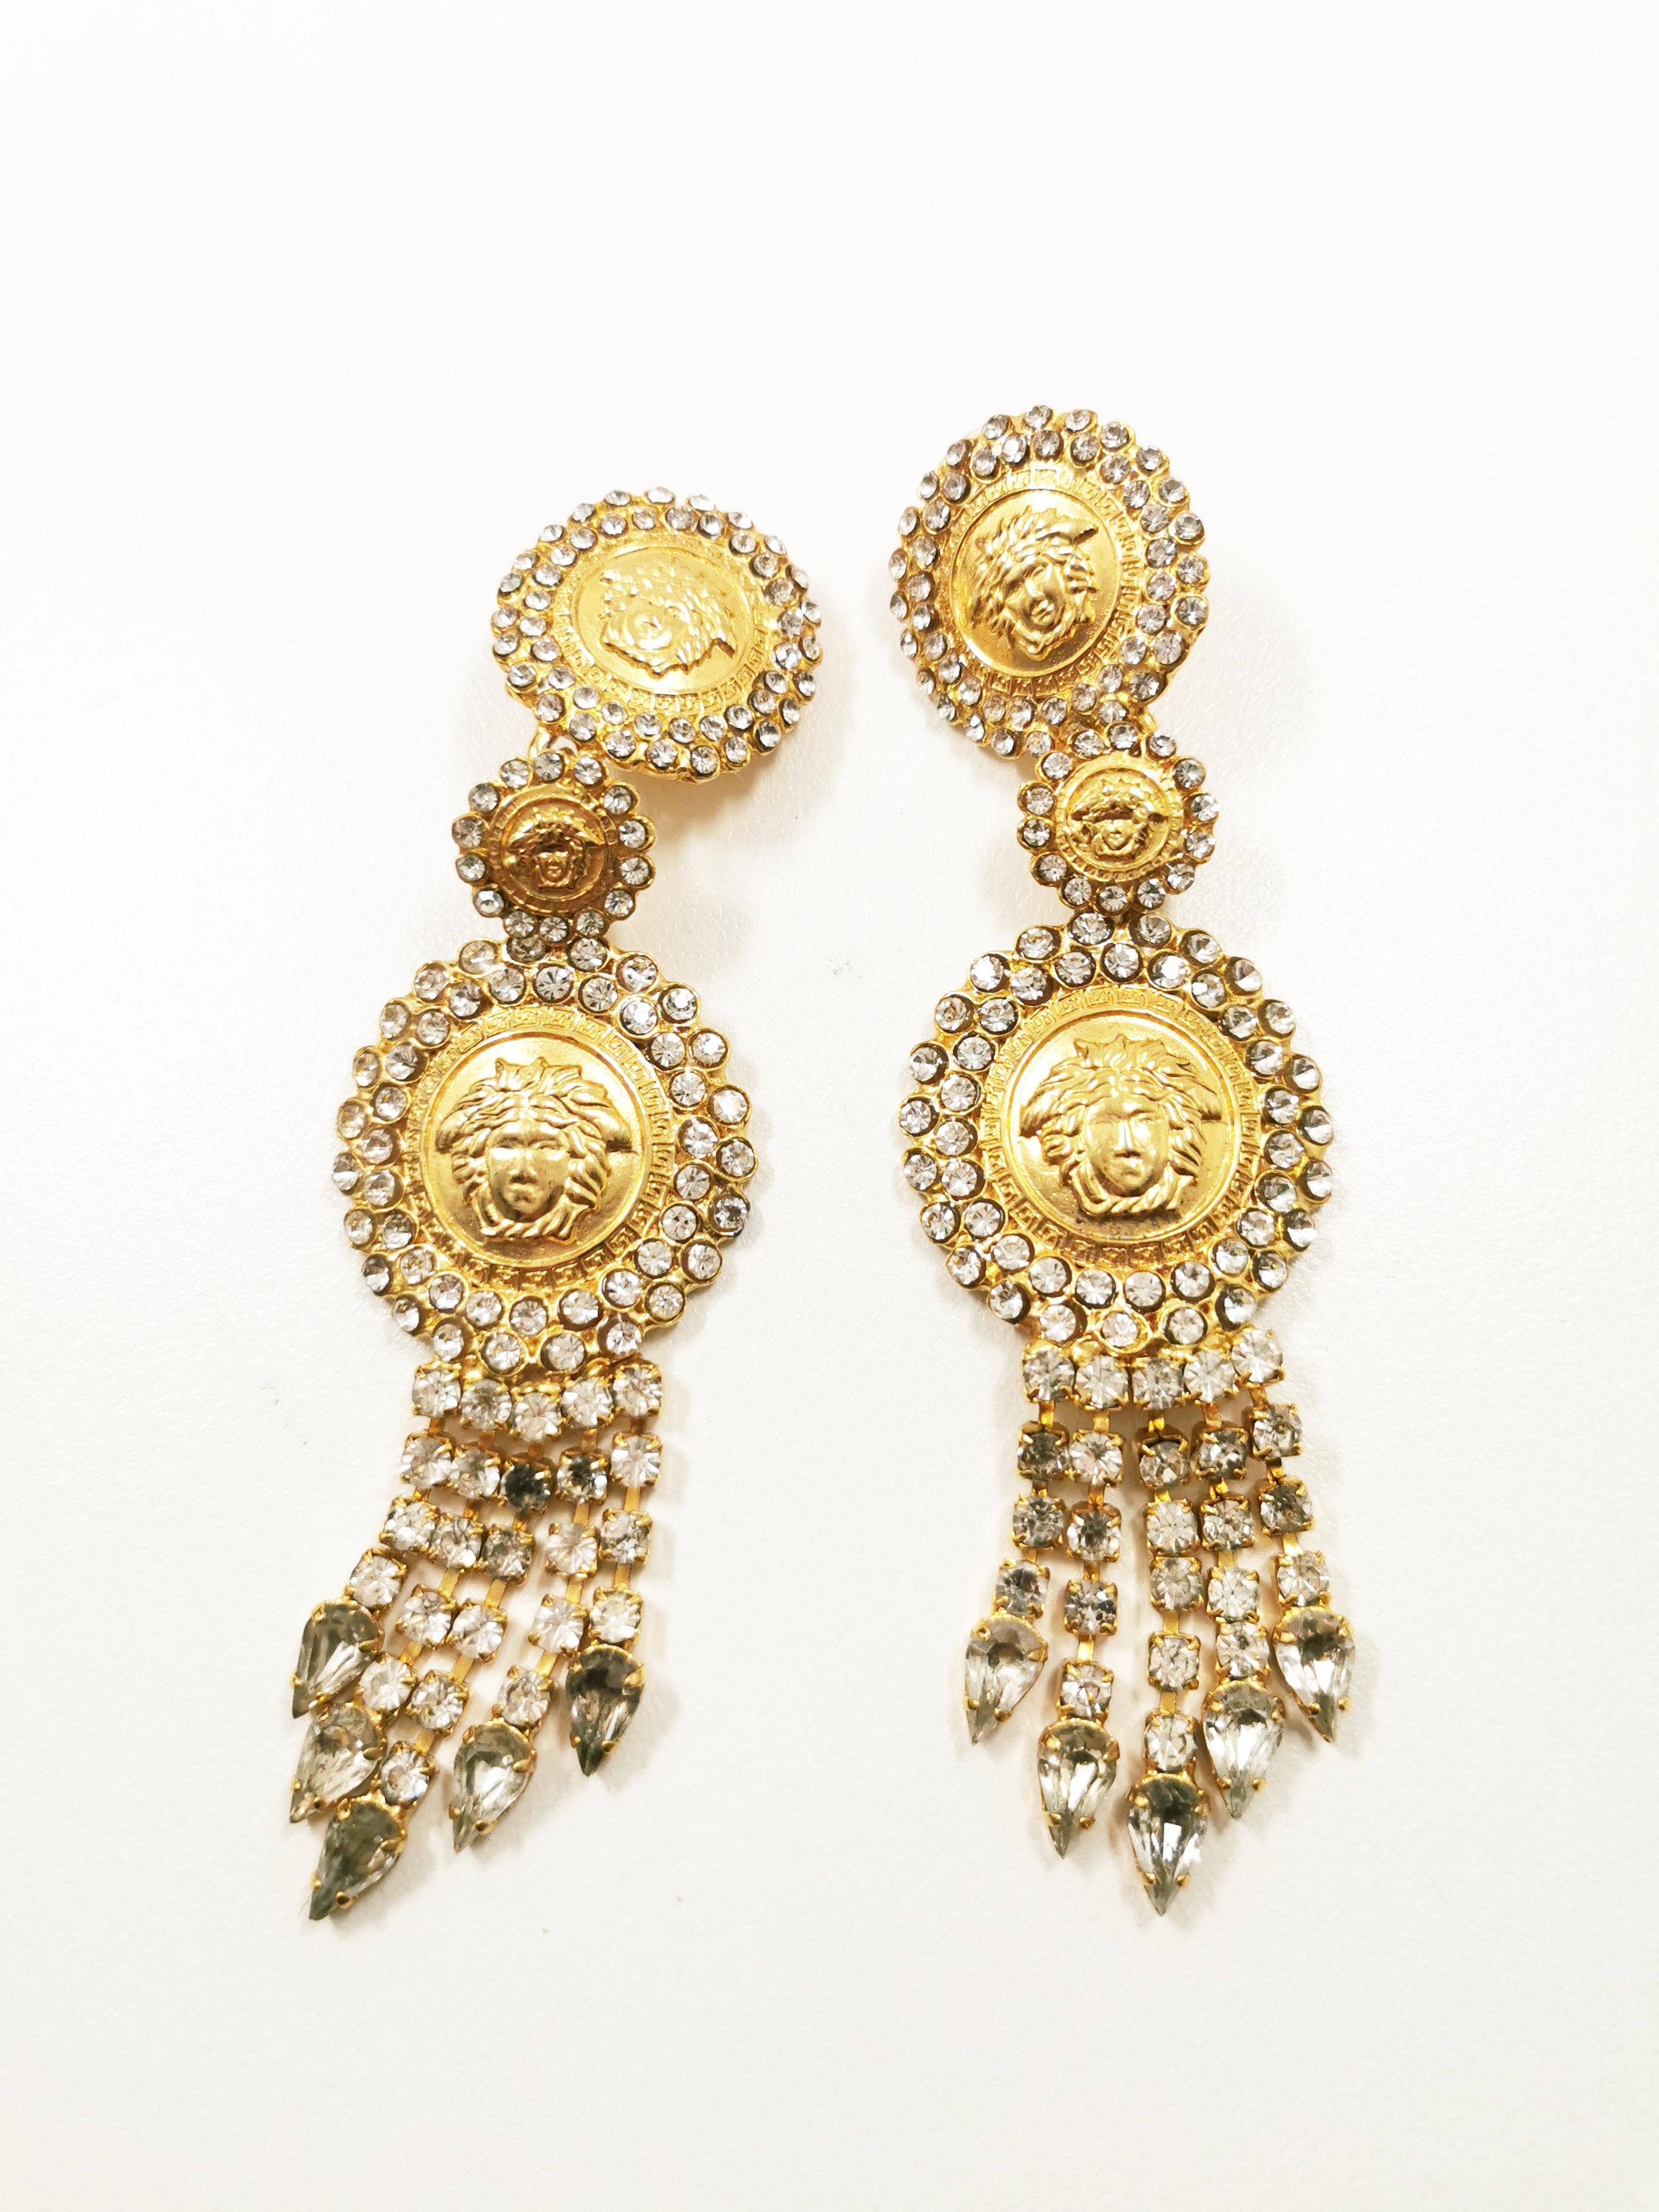 Introducing the iconic and timeless 1990's Gianni Versace Medusa Rhinestones Tassel Massive Drop Earrings – a dazzling tribute to luxury and opulence. These exquisite earrings encapsulate the essence of Versace's bold and distinctive design